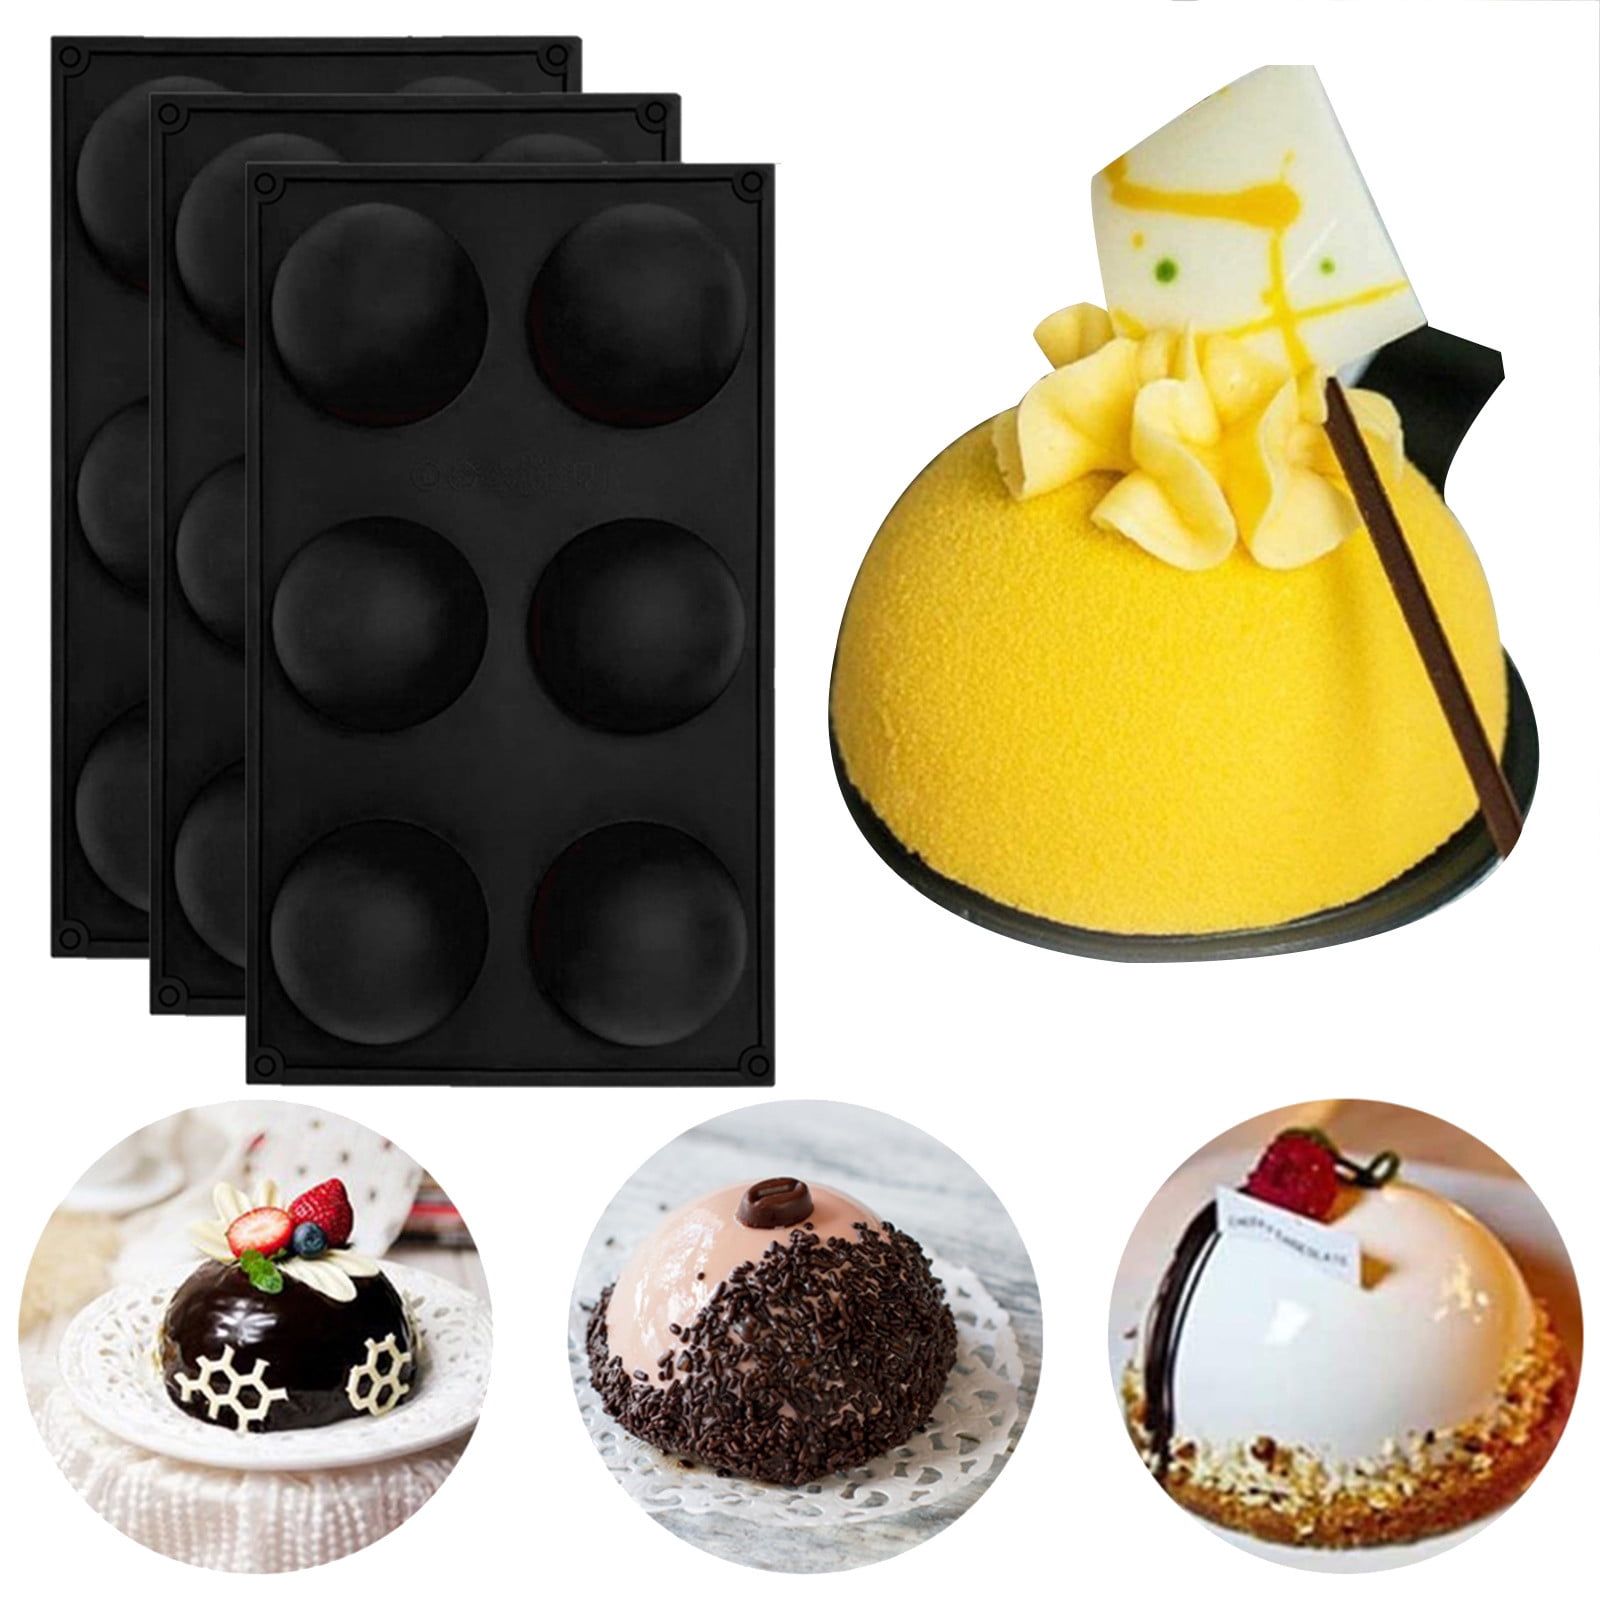 Details about   2*6 Cavity Half Ball Sphere Cake Mold Muffin Chocolate Baking Pan Silicone Mould 